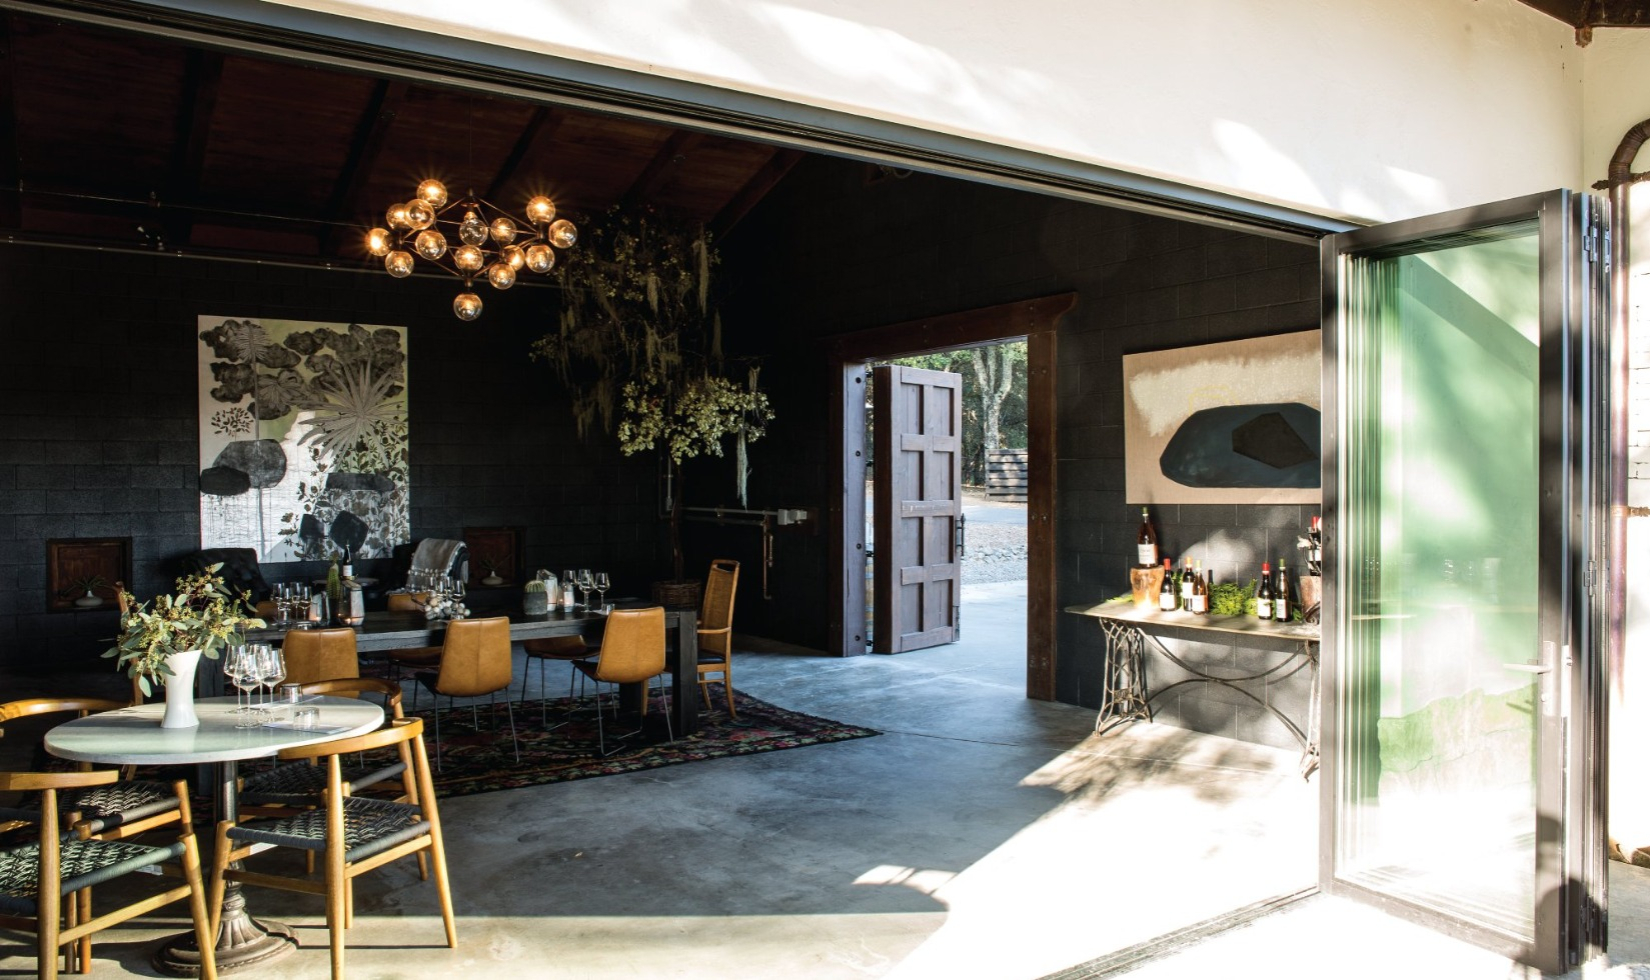 Reeve tasting room with bohemian furniture and concrete floors with door open to terrace.